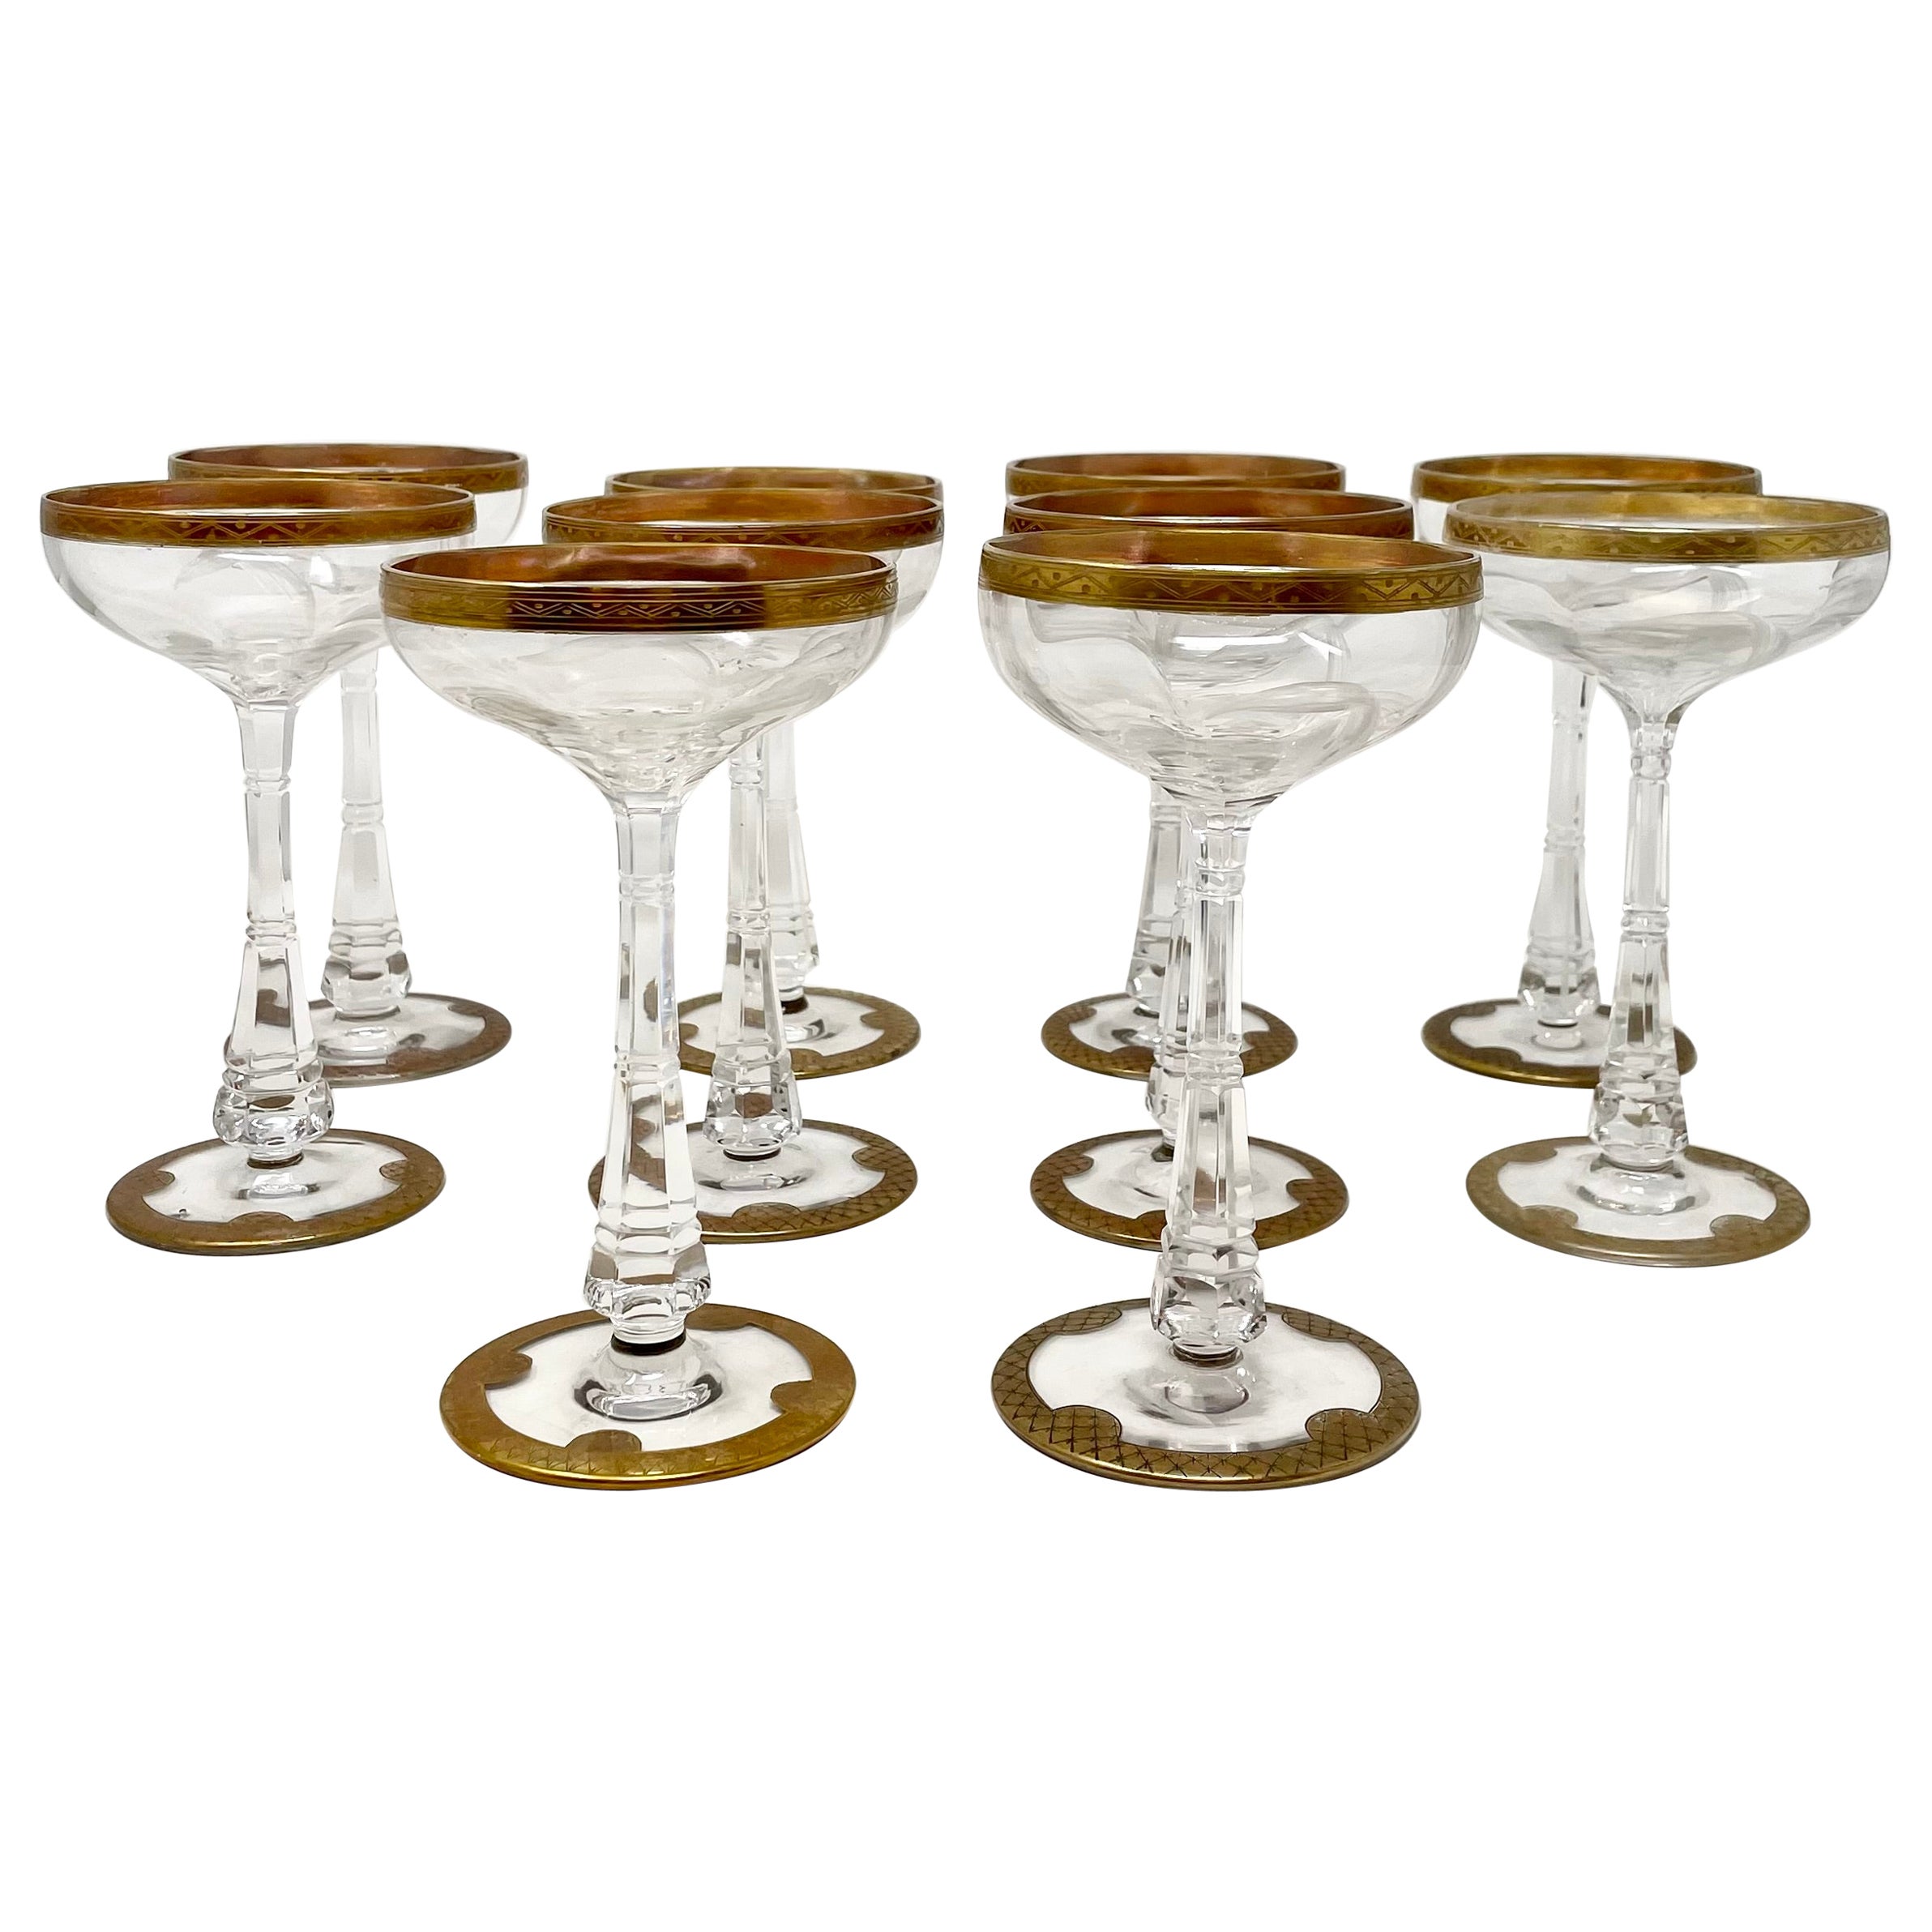 Set of 10 Antique French Art Nouveau Cut Crystal Champagne Coupes, circa 1890's